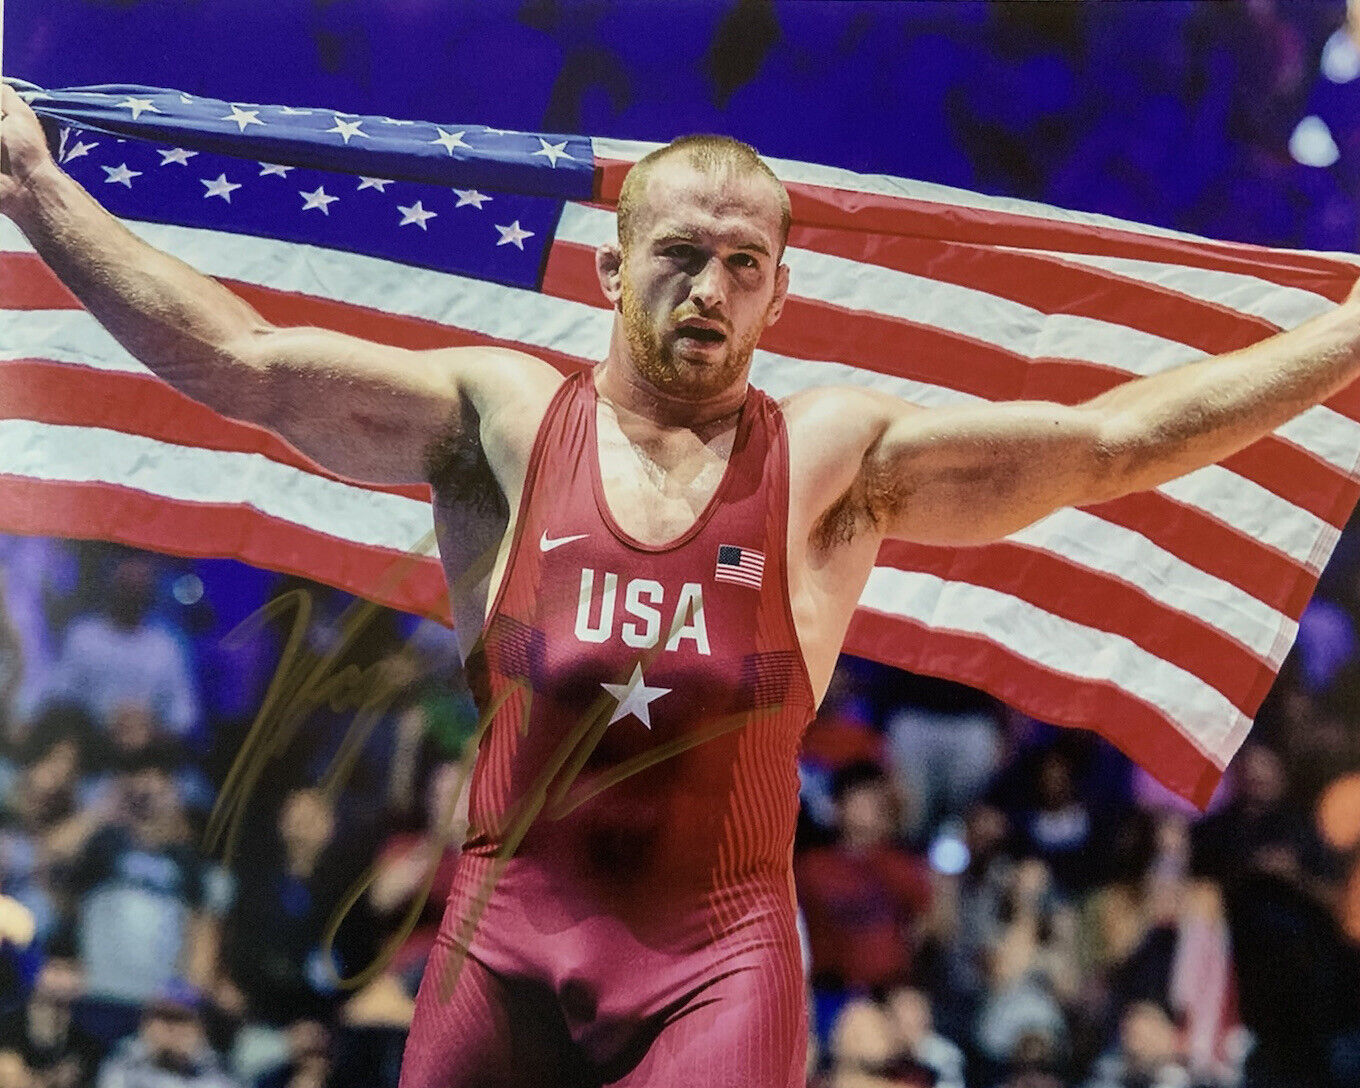 KYLE SNYDER HAND SIGNED 8x10 Photo Poster painting WRESTLING USA AUTOGRAPHED RARE AUTHENTIC